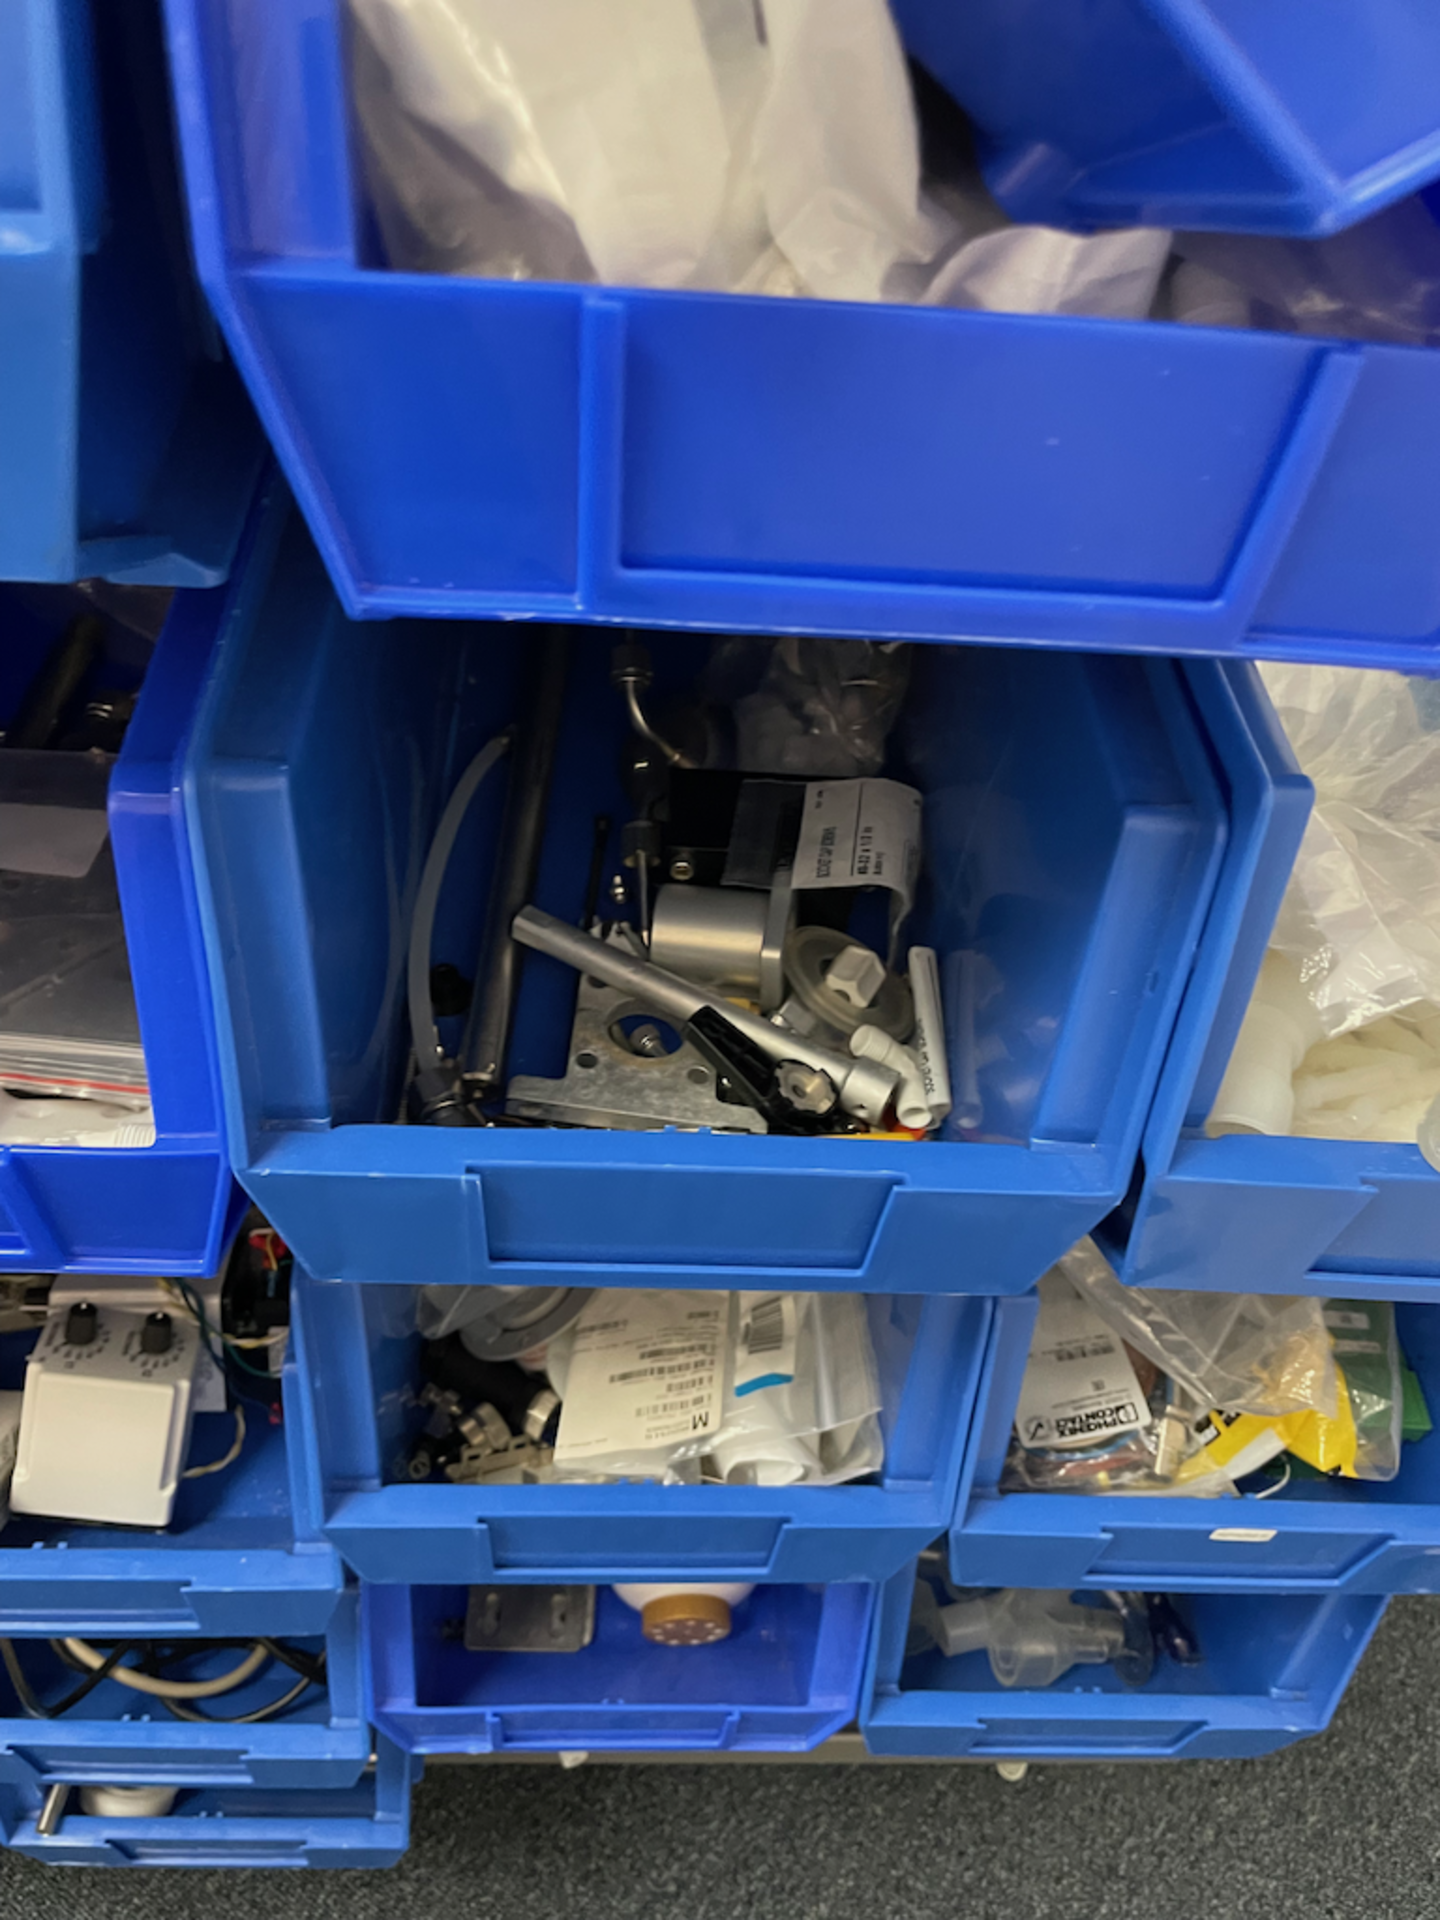 PORTABLE ULINE PARTS RACK WITH CONTENTS OF BLUE TOTES - Image 21 of 22